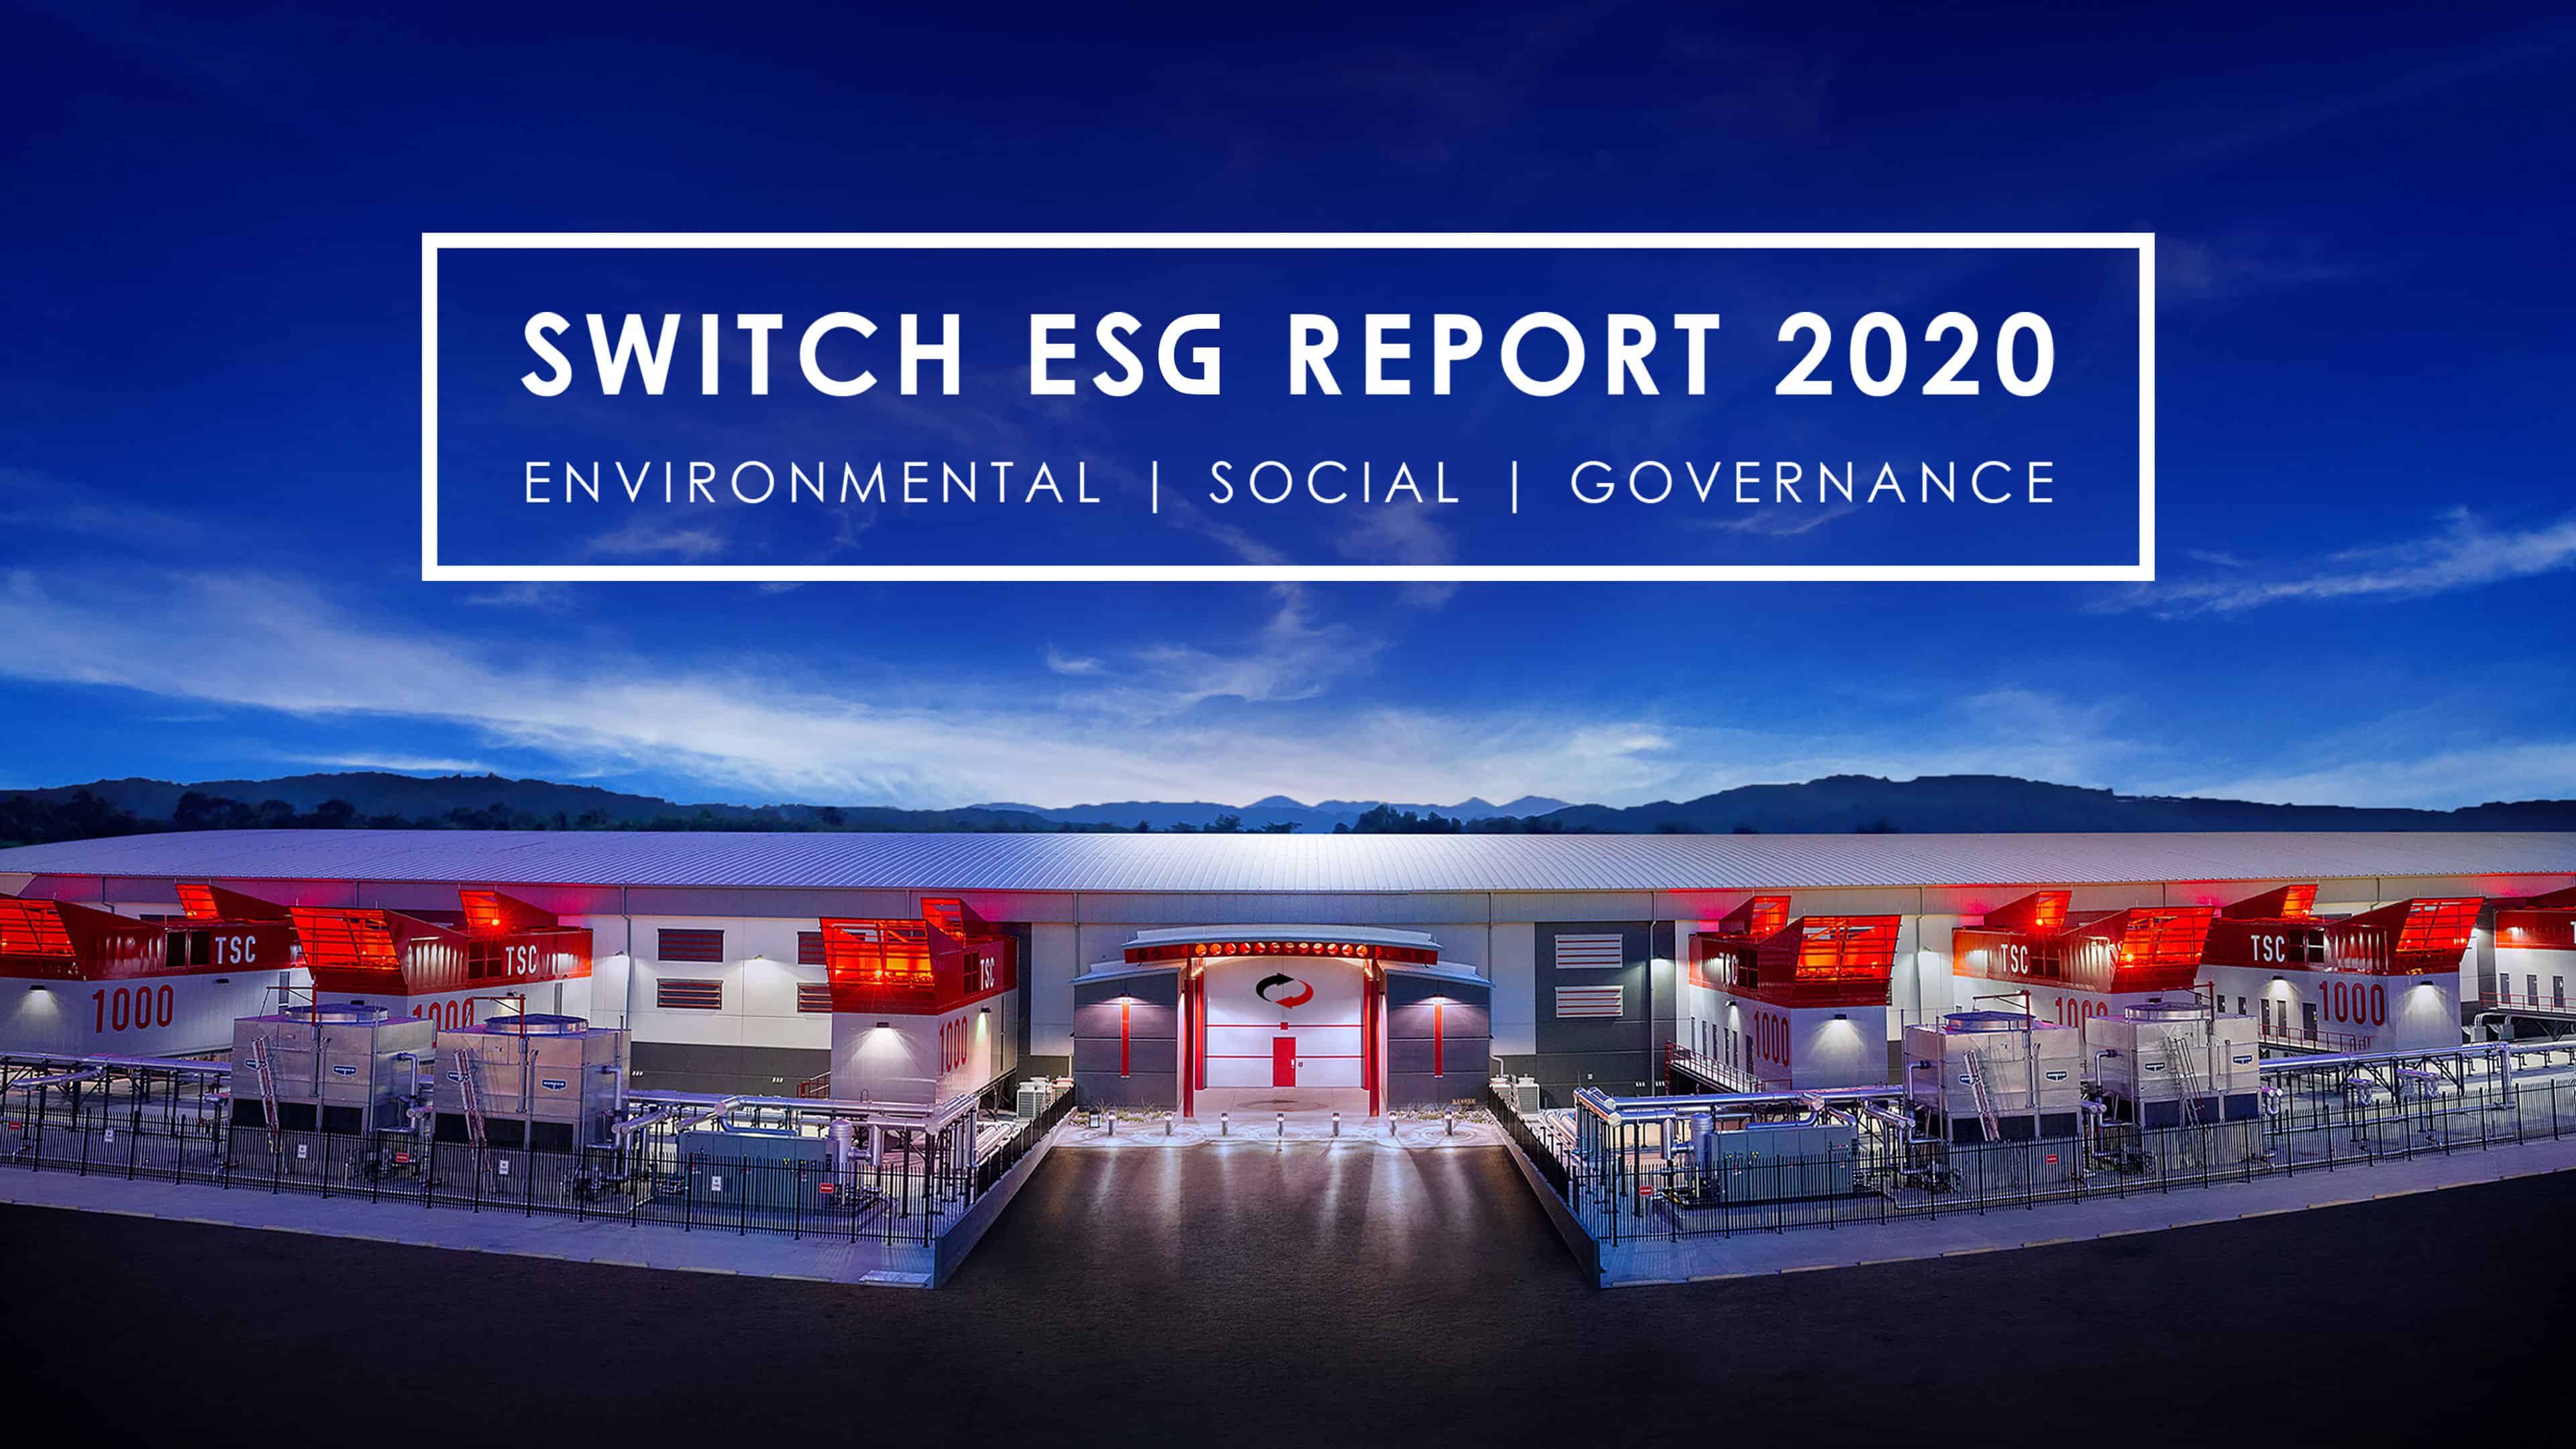 Switch Issues Annual Environmental, Social and Governance Report